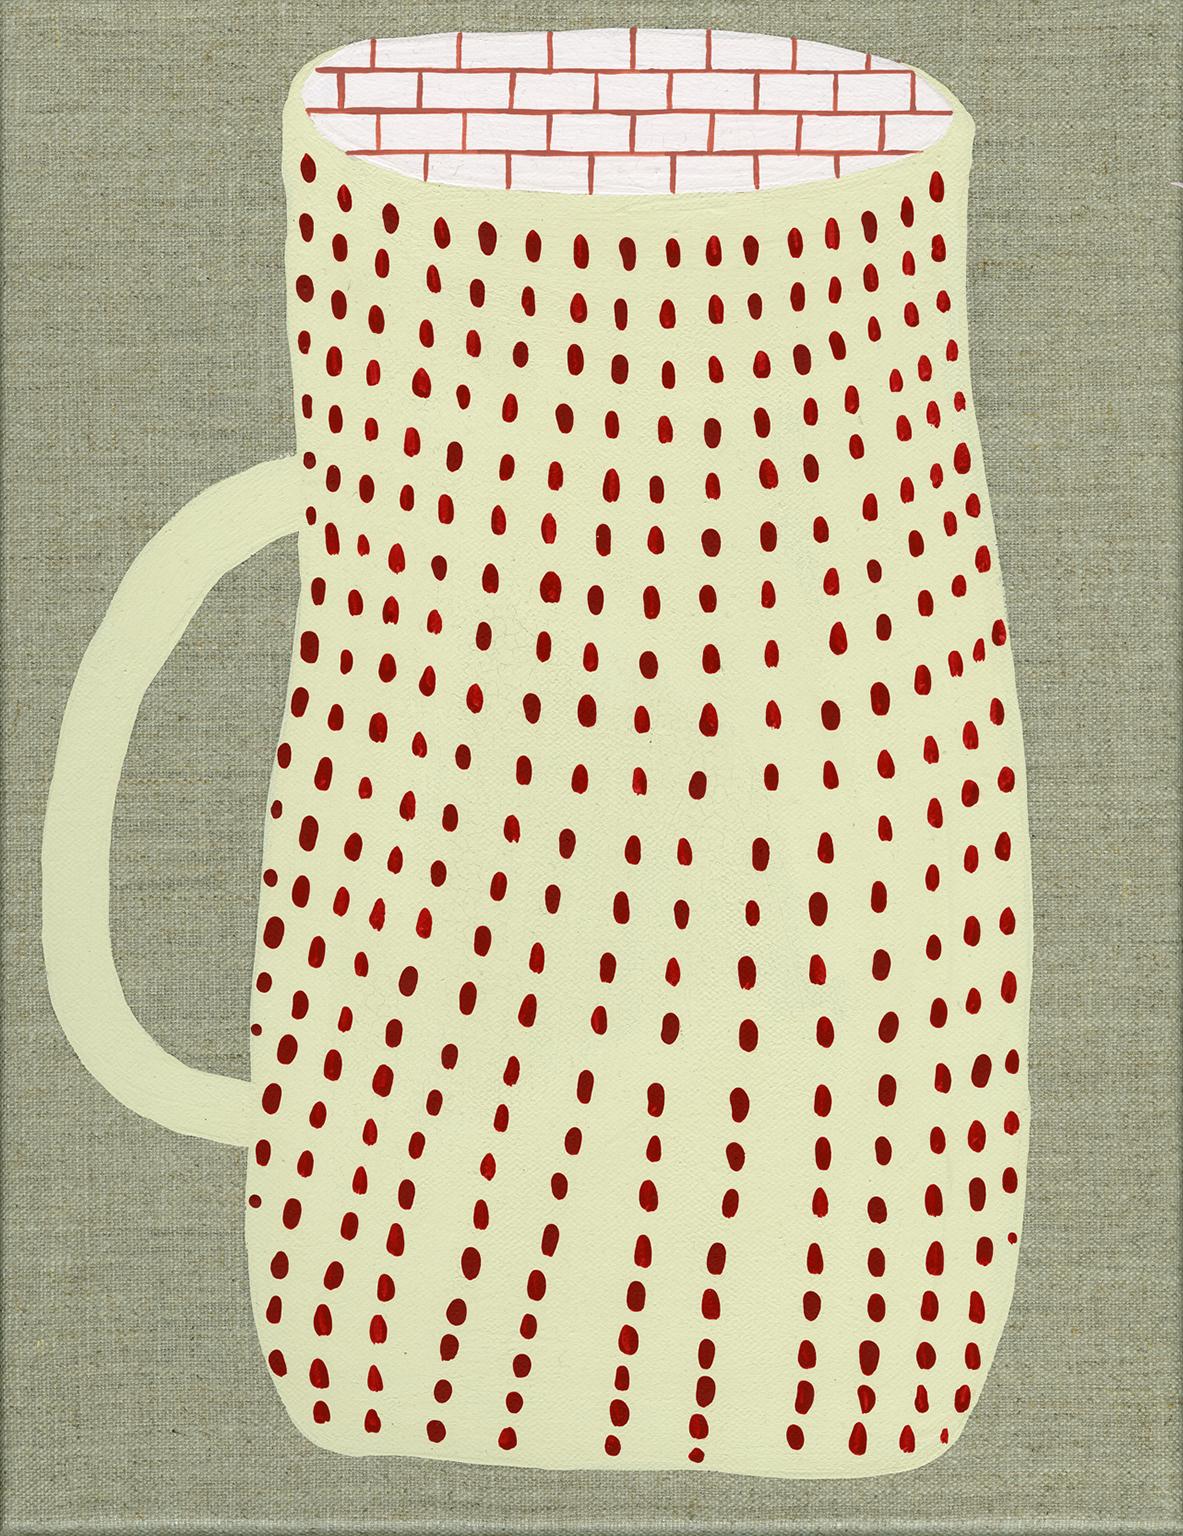 "A.M" acrylic painting on linen coffee cup pattern